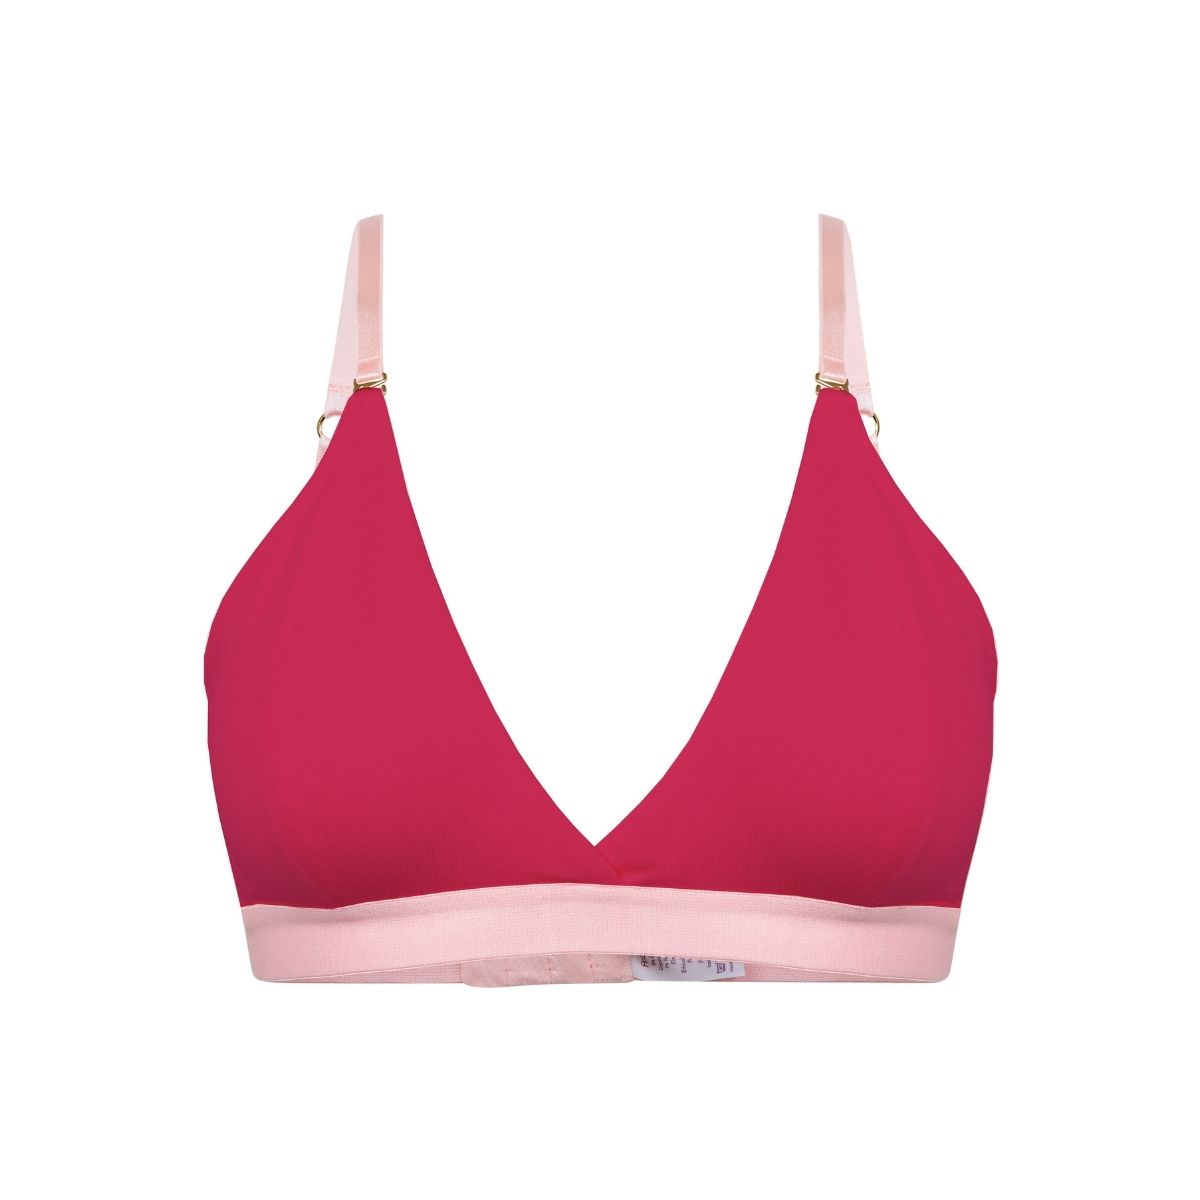 AmaElla Ethical Lingerie Organic Cotton Triangle Bra in Red - Small female (Red)